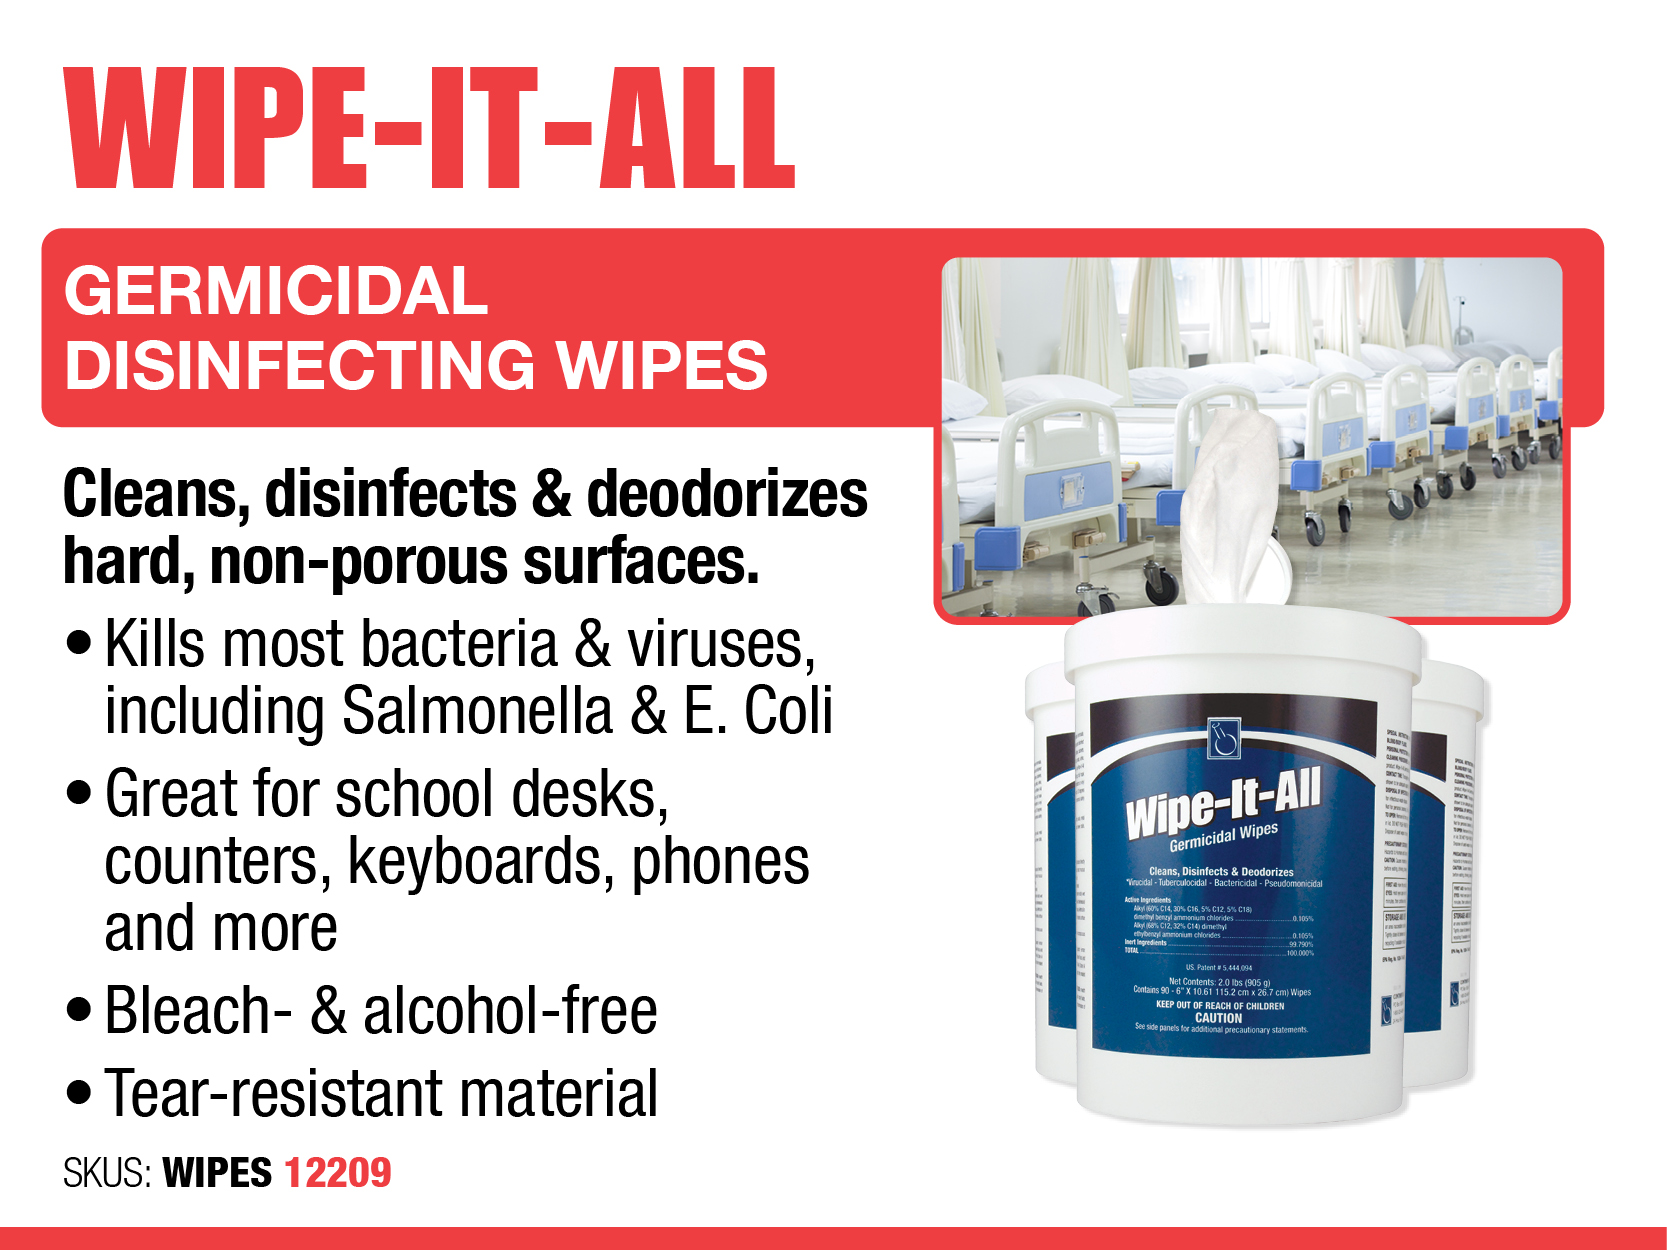 Wipe It All - Disinfecting Wipes - Cold and Flu Prevention - Deodorize, Disinfect, Kill COVID-19